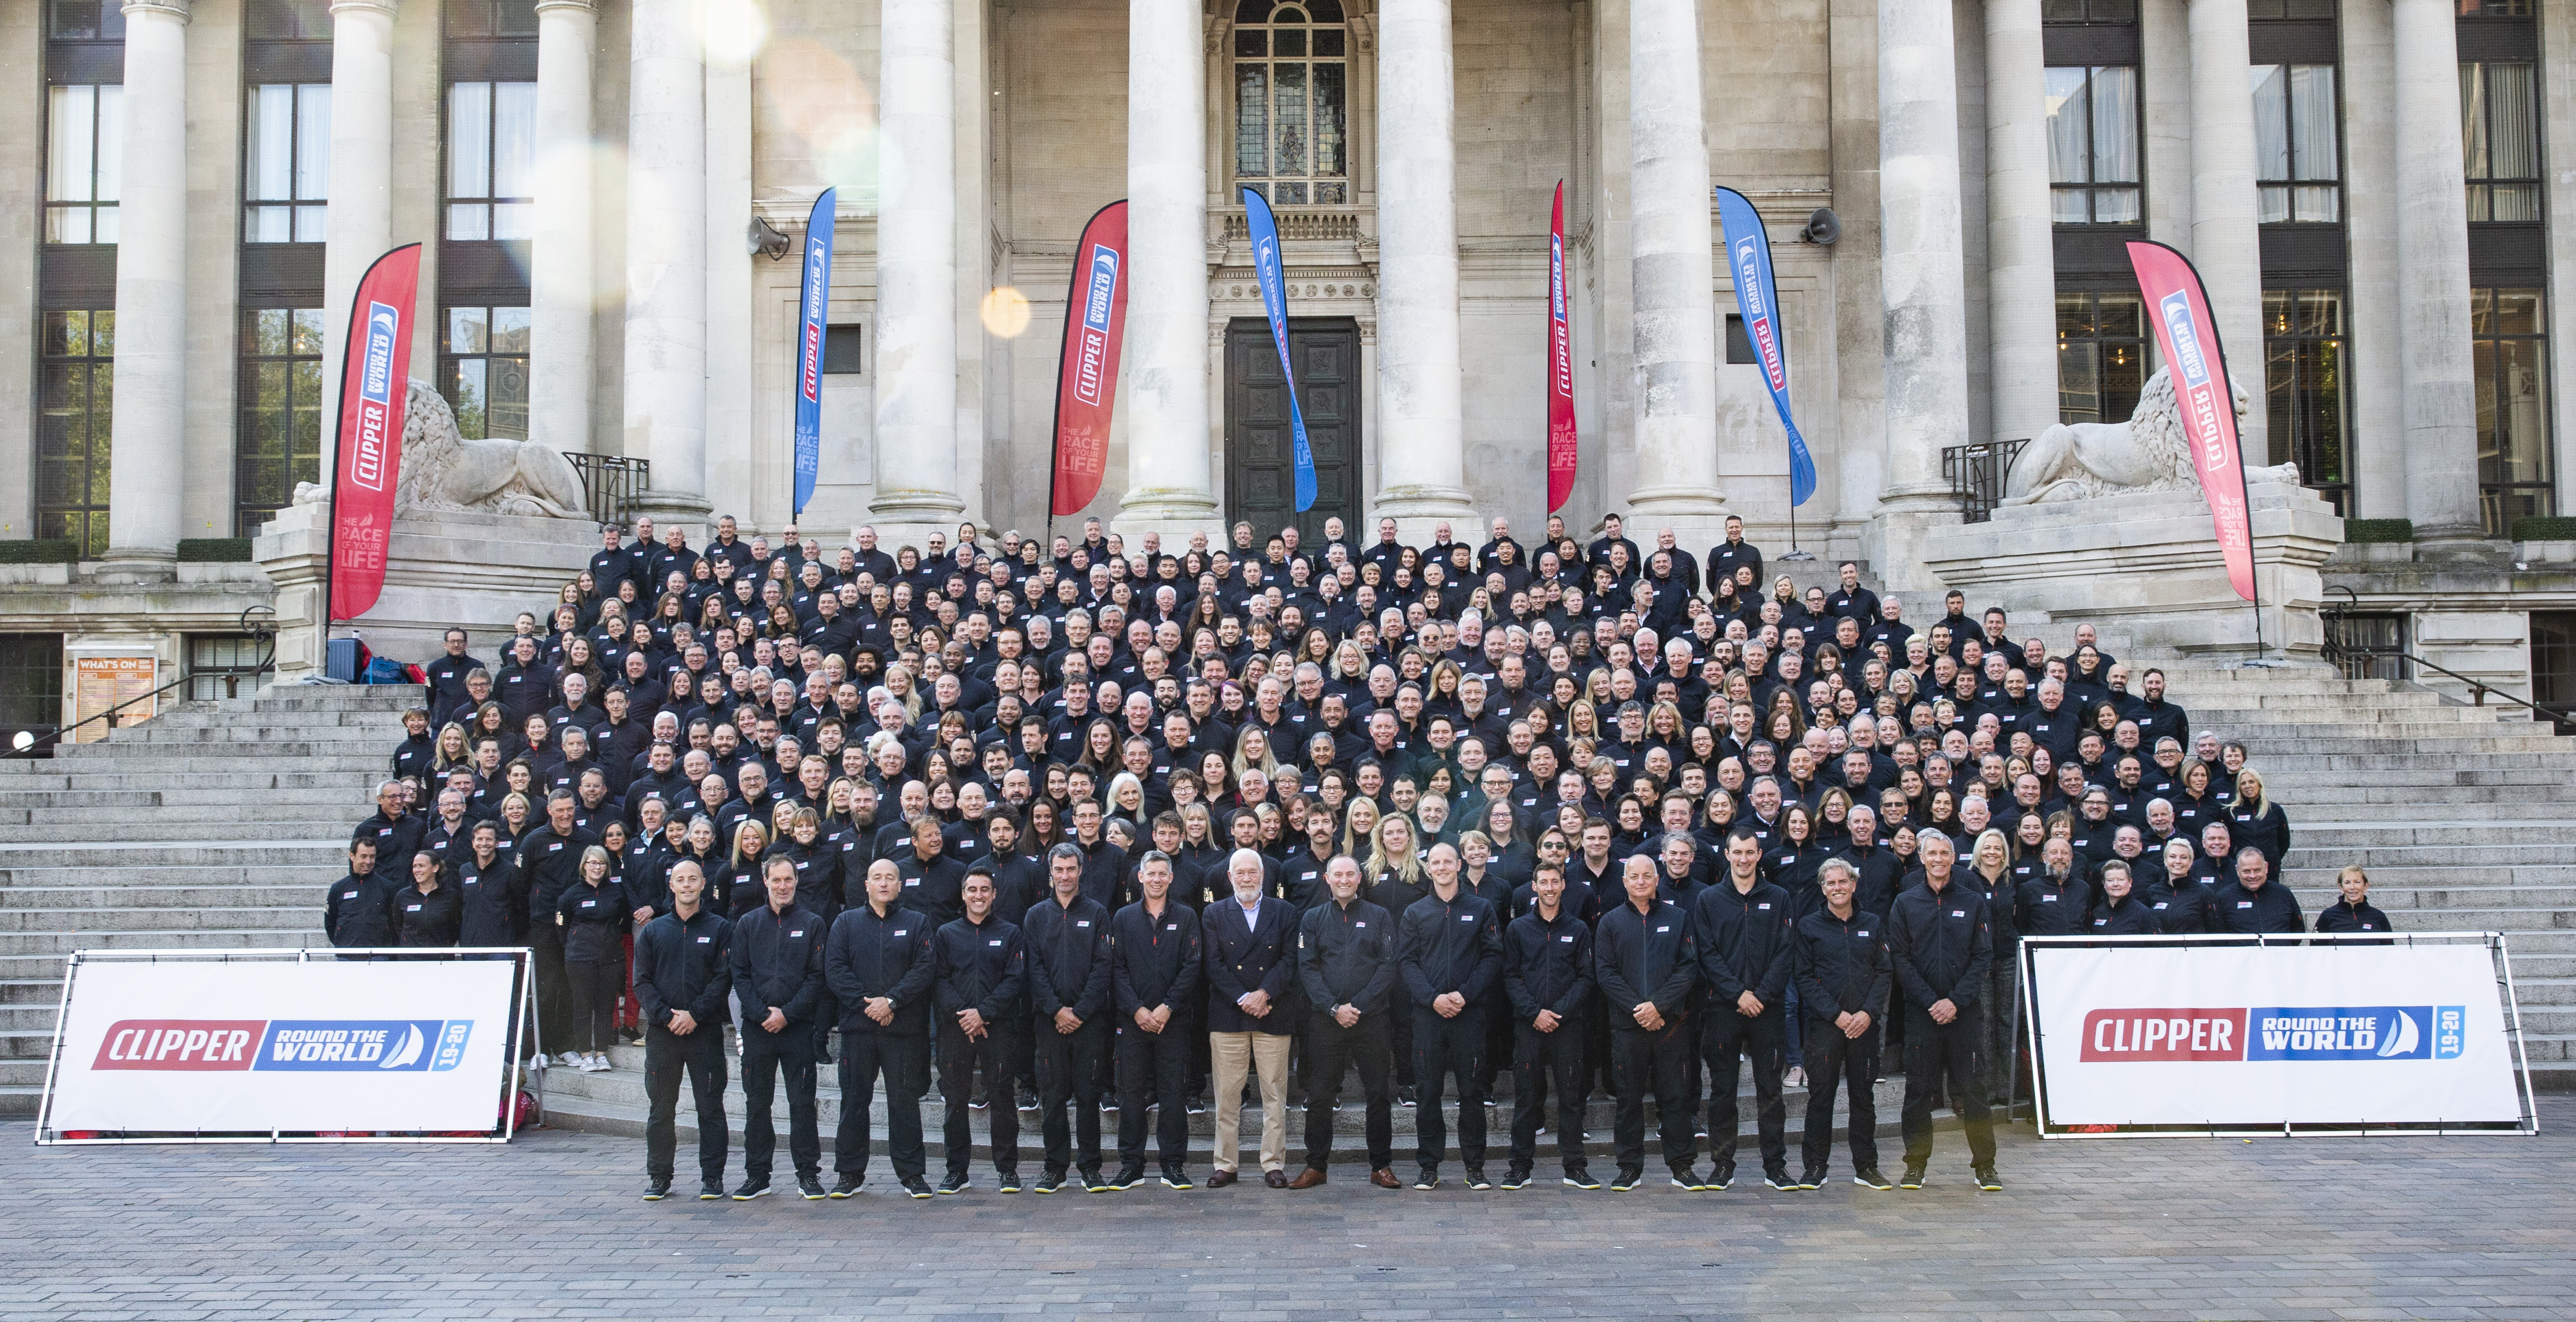 Clipper 2019-20 Race Crew with Sir Robin and Skippers at Portsmouth Guildhall